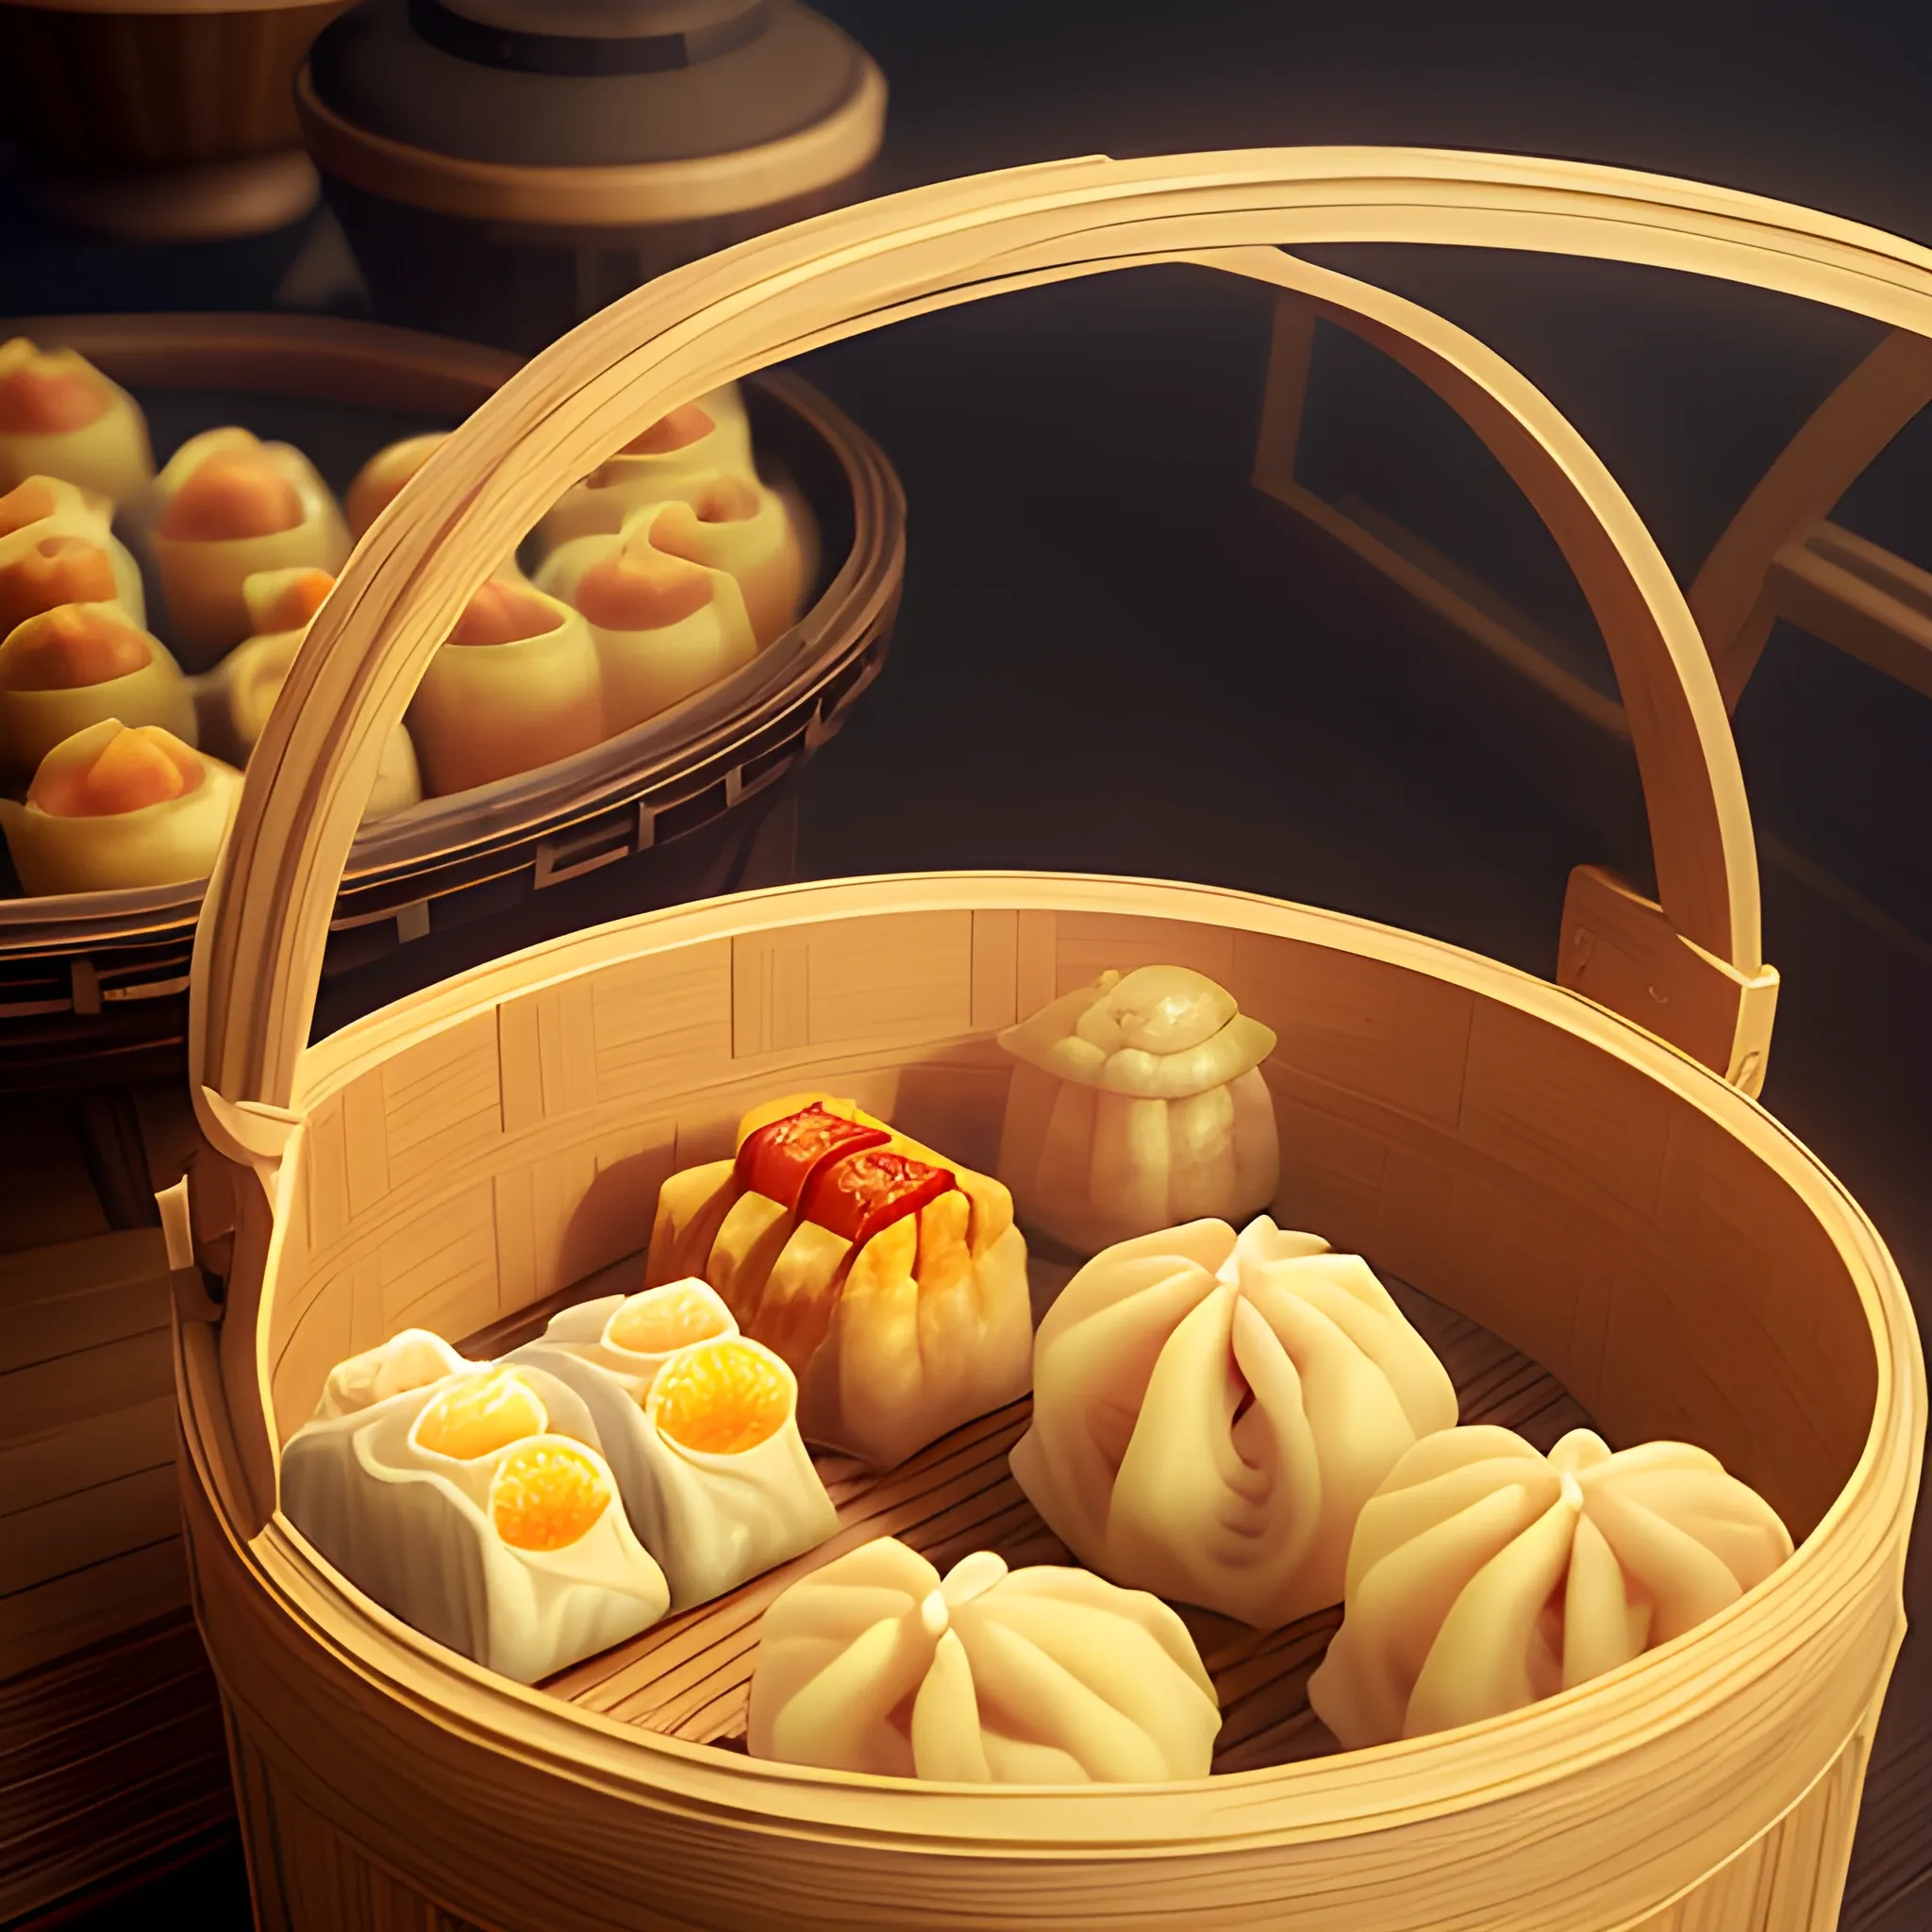  cinematic, steaming basket with all kinds of dim sum
 , epic realism, cinematic, epic realism,8K, highly detailed, long shot technique, dreamy vibe